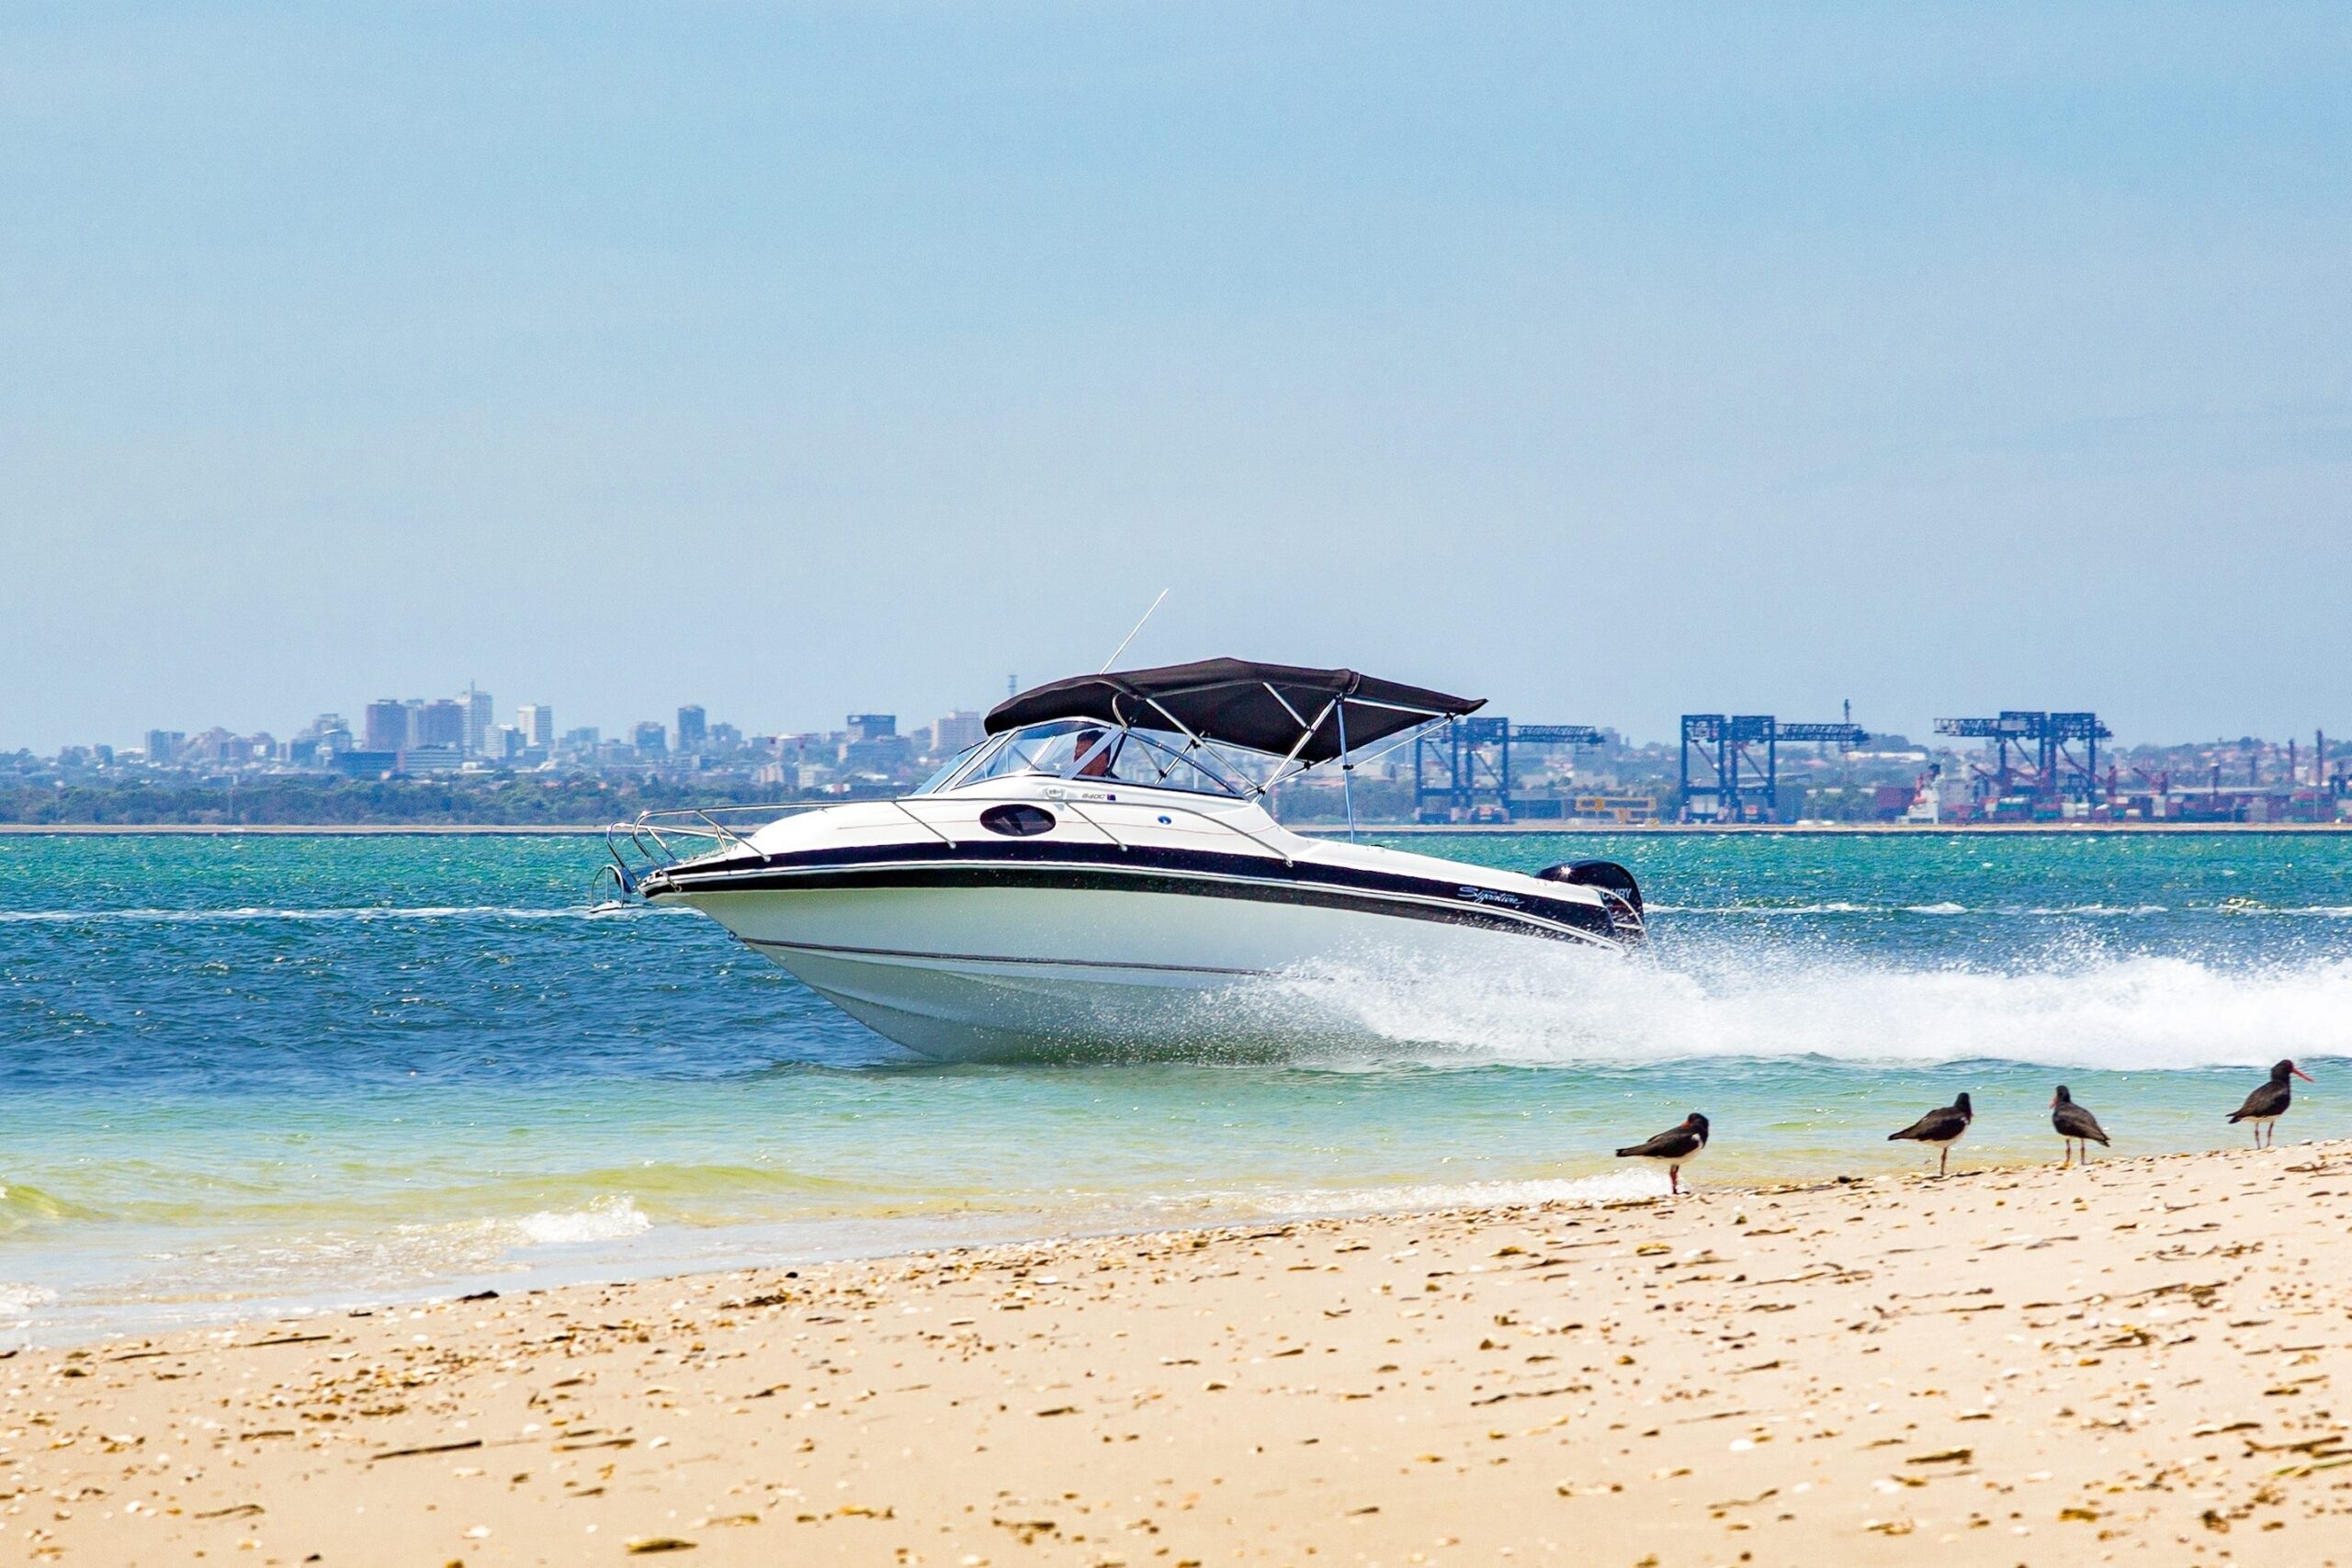 Why is Important to Use Blue Book for Boats Prior Purchasing a Boat?